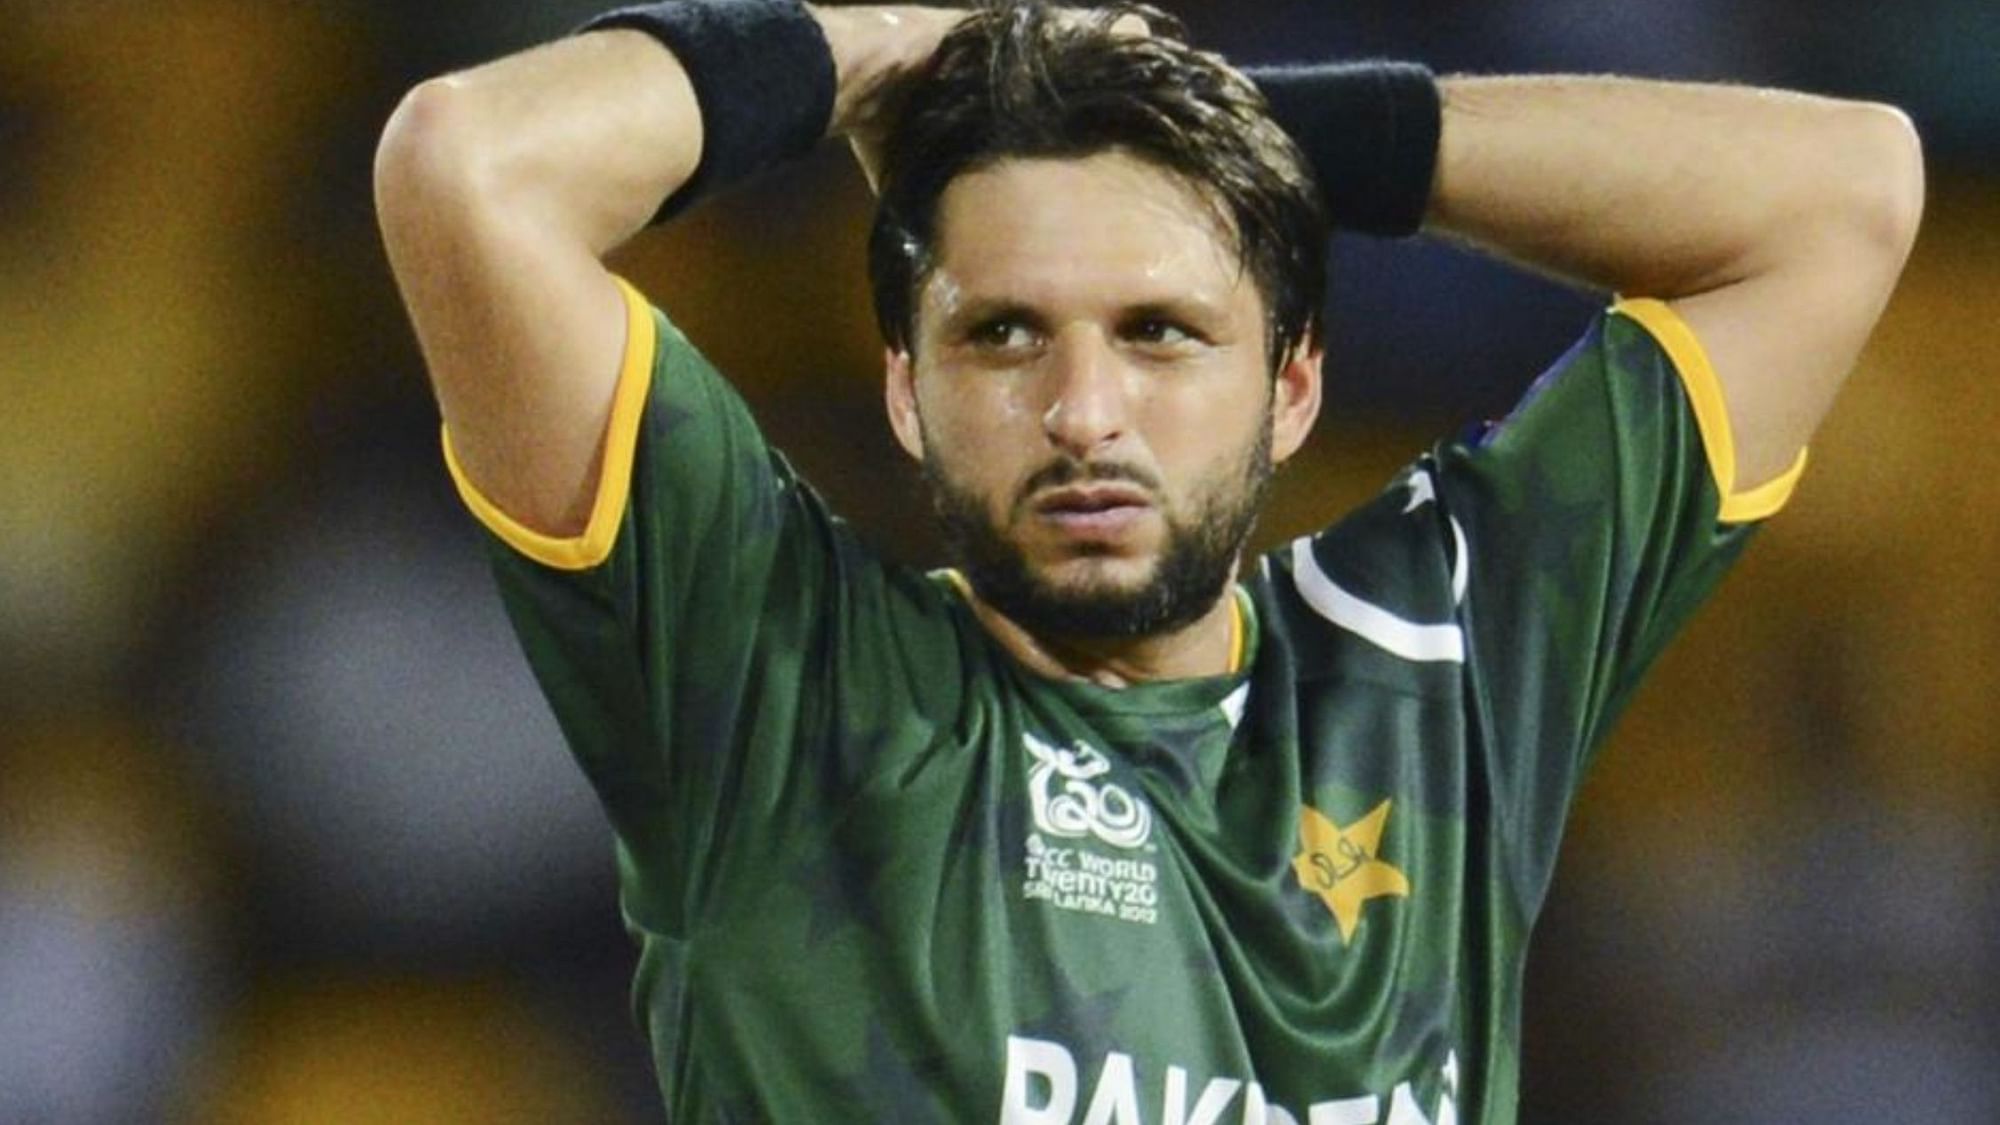 Former Pakistani all-rounder Shahid Afridi has tested positive for coronavirus, he confirmed in a Tweet on Saturday.